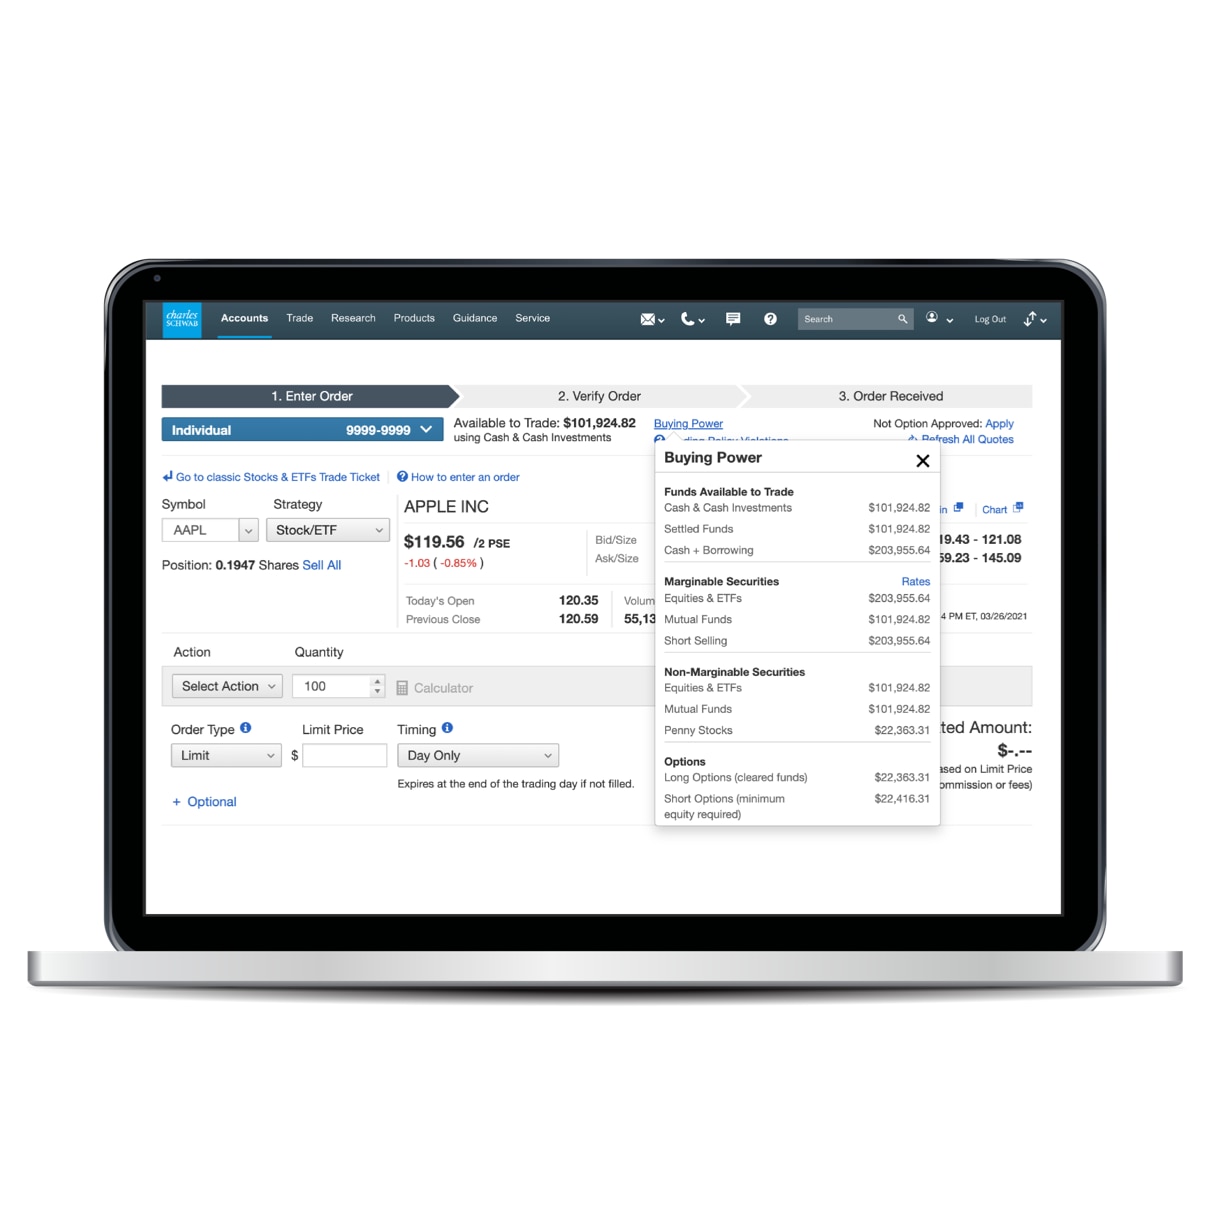 Laptop showing Schwab’s platform and a section showing Margin available in the Buying Power